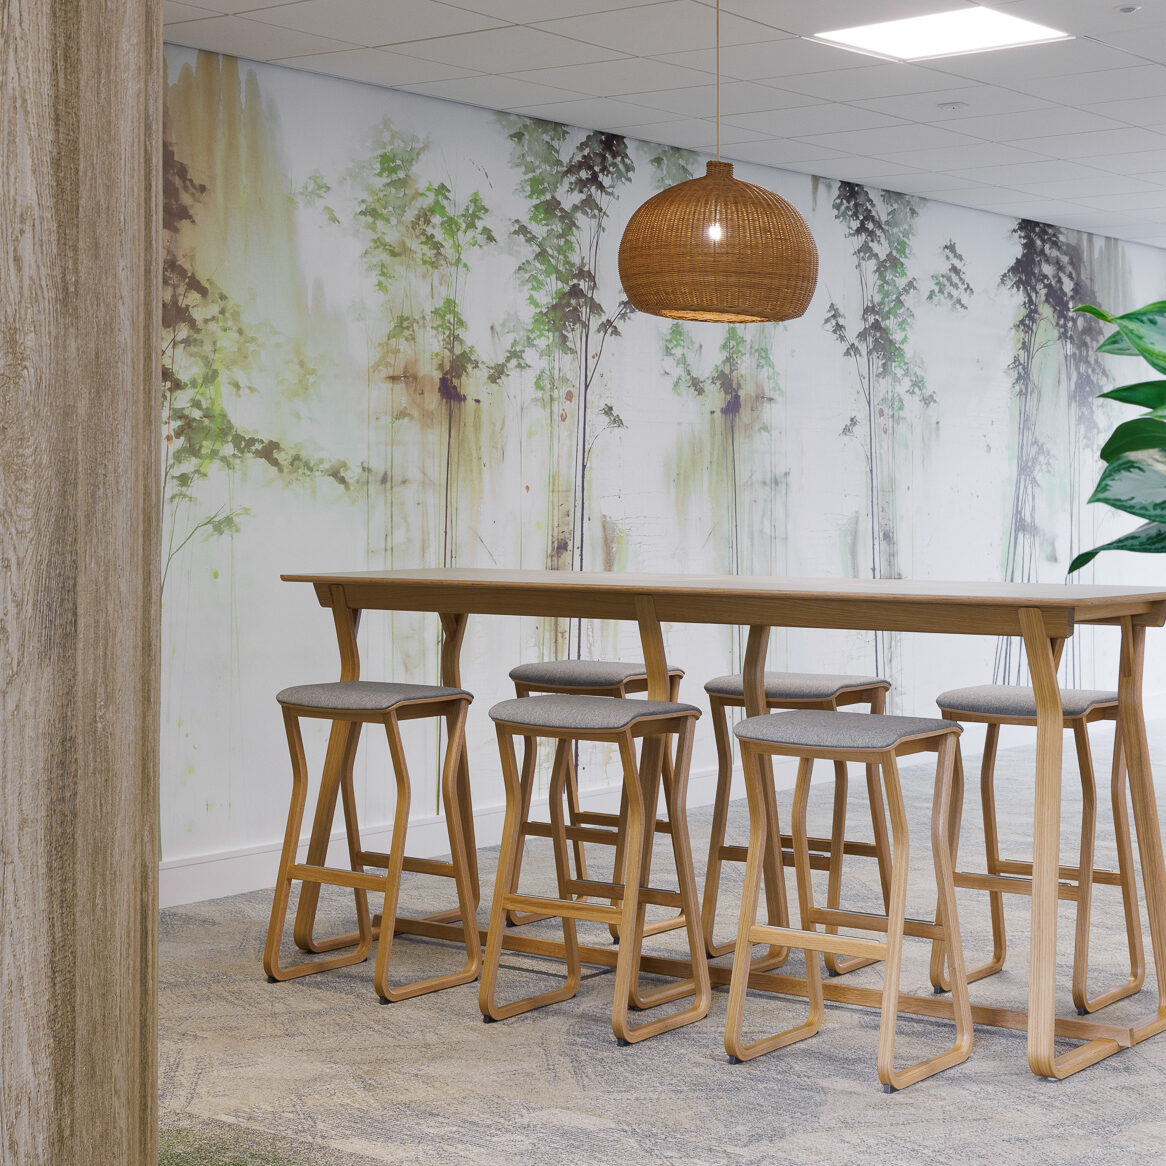 Wooden high table and high stools in green office space